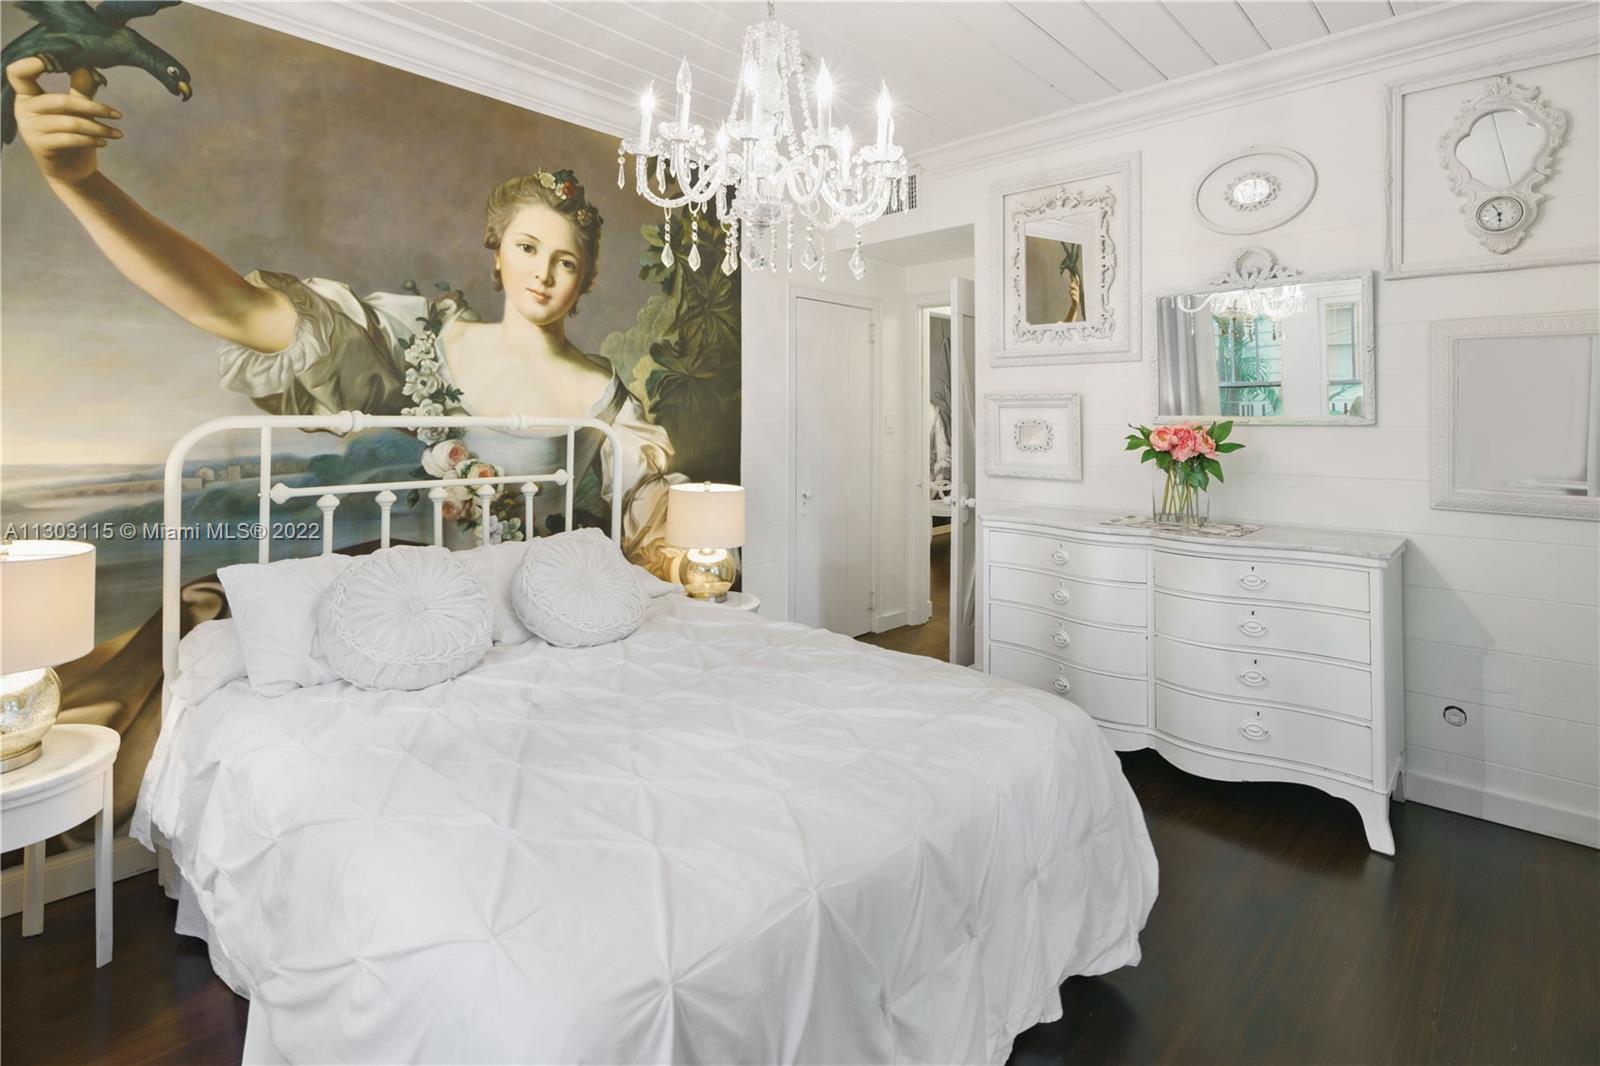 a bedroom with a bed a chandelier and dresser